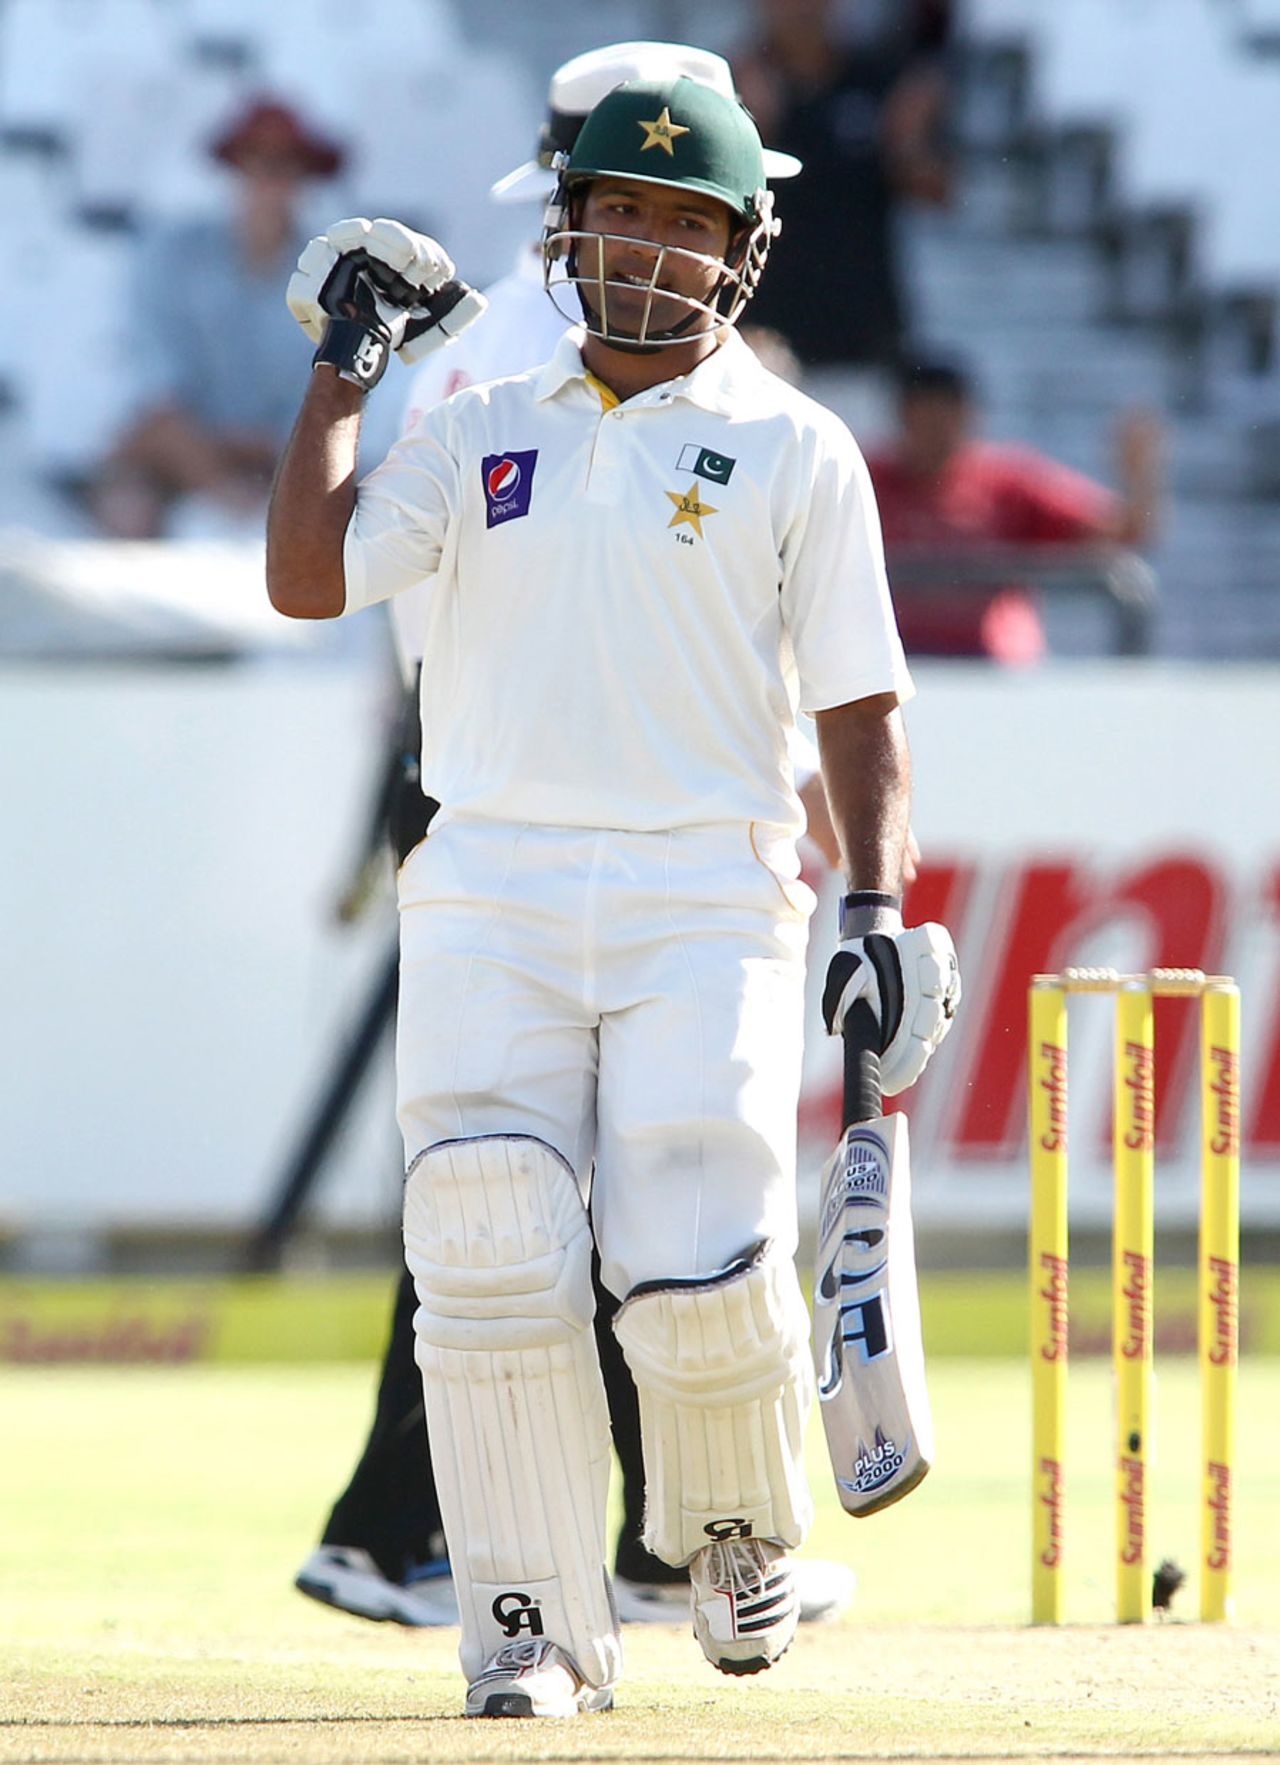 Asad Shafiq reaches his century, South Africa v Pakistan, 2nd Test, Cape Town, 1st day, February 14, 2013